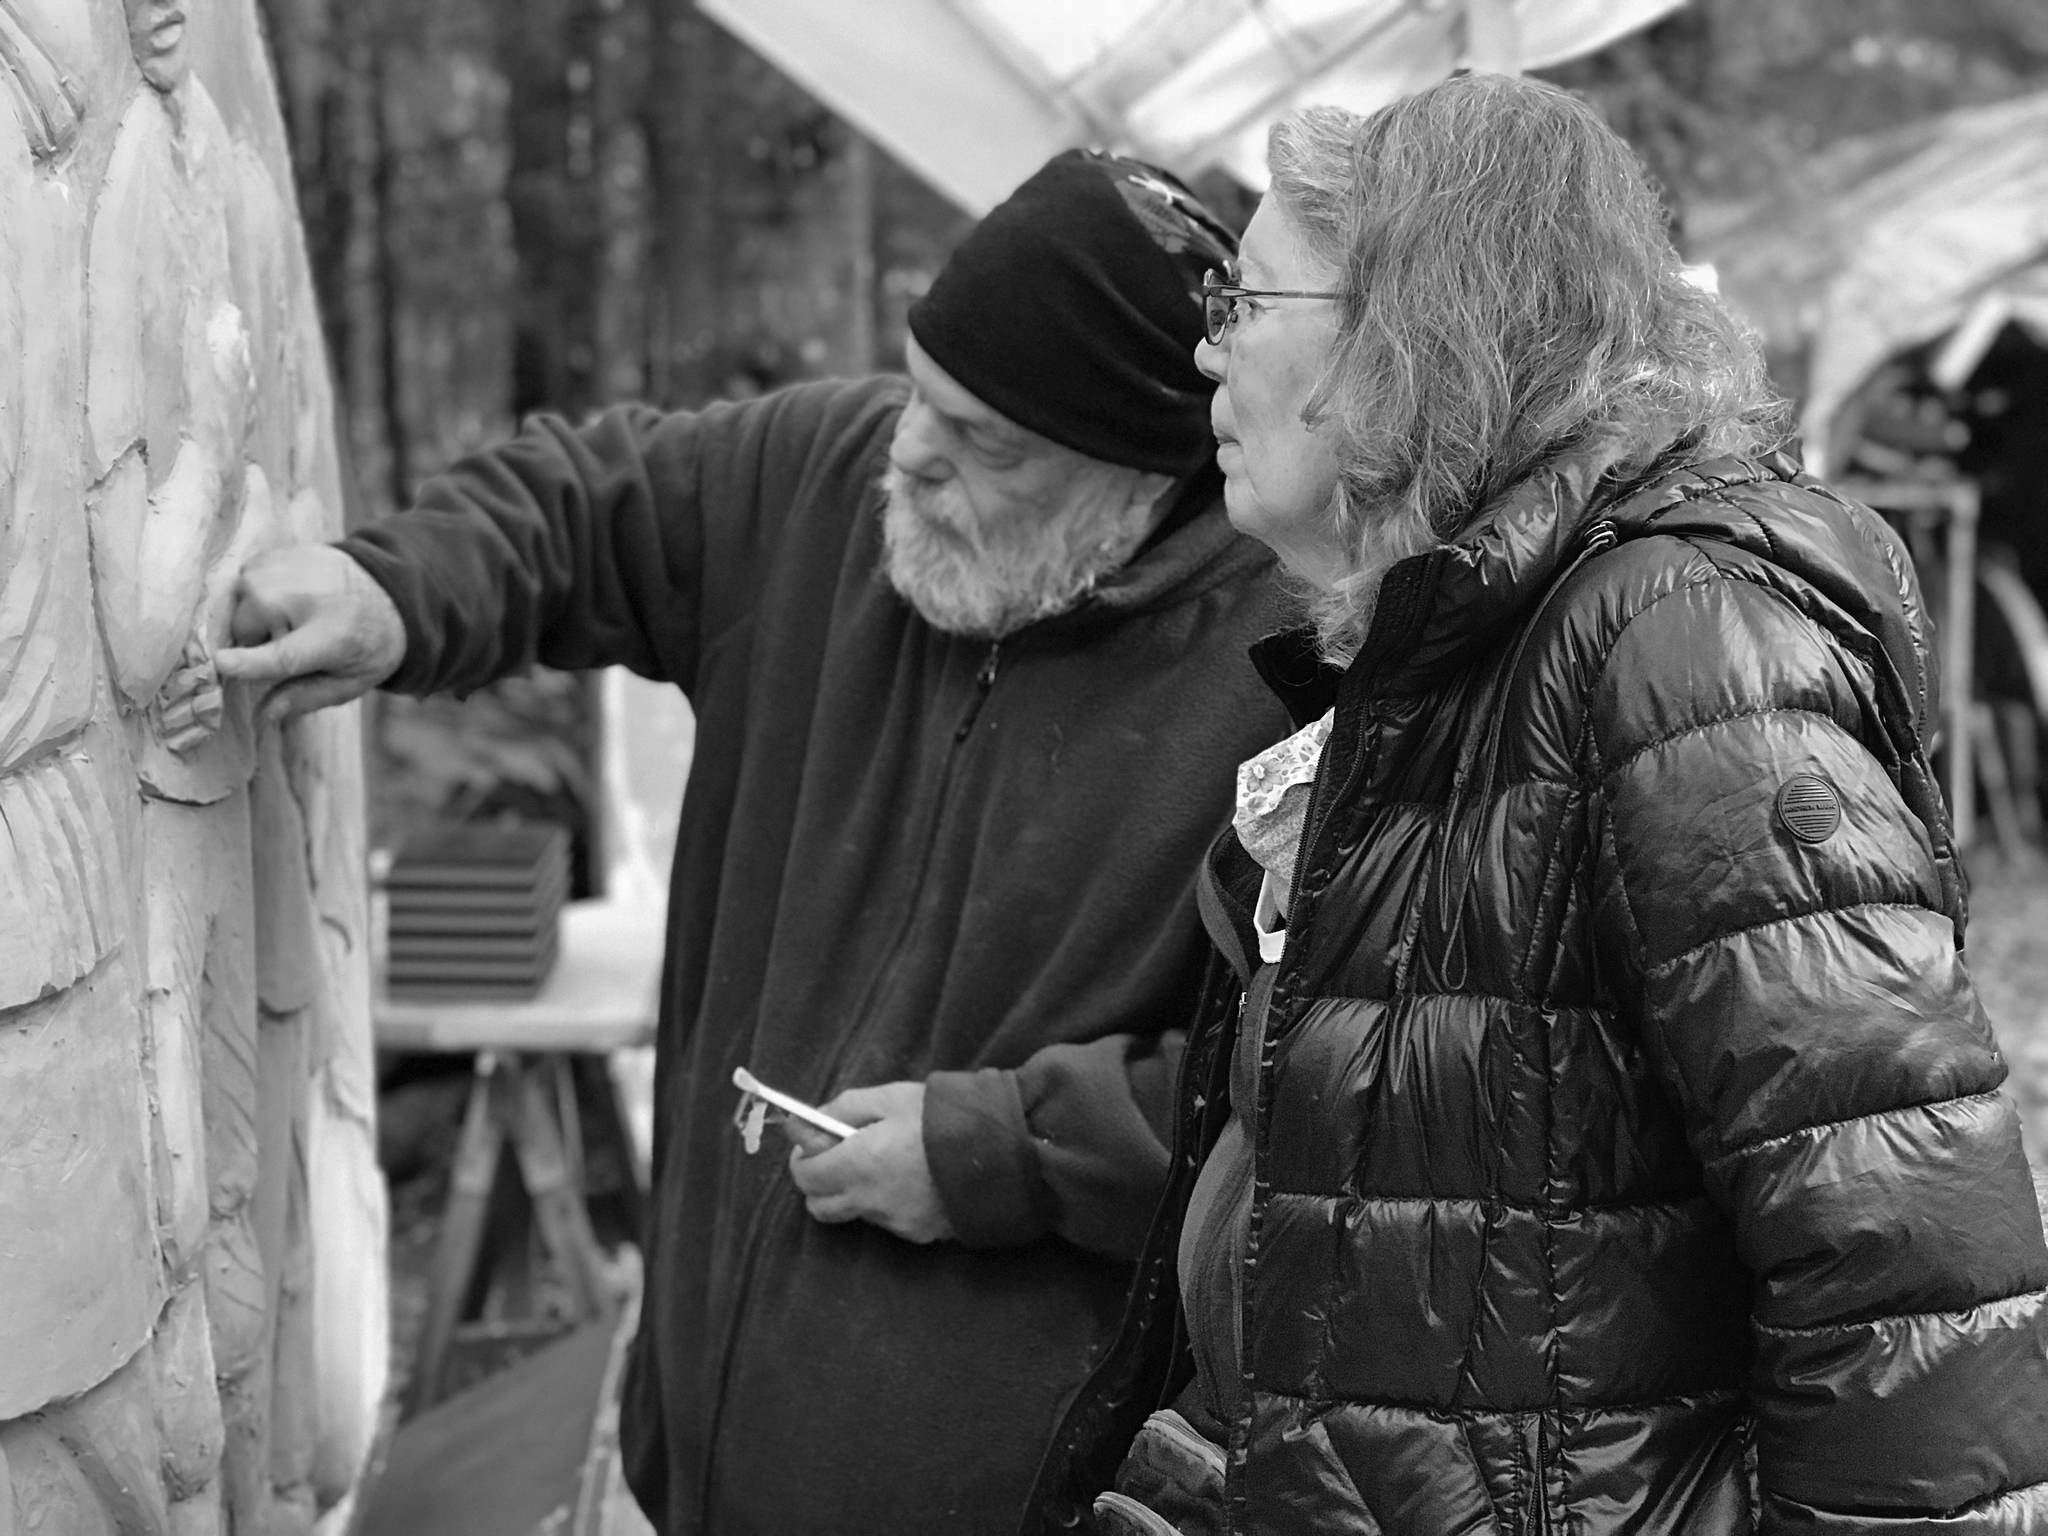 Photo by Christina Whiting 
Sara Berg, right, talks with artist Brad Hughes, left, at Hughes’ Homer studio in June 2021 about the Loved & Lost Memorial Bench project Berg and other family and friends of Anesha Murnane commissioned to honor Murnane and other missing women and children.